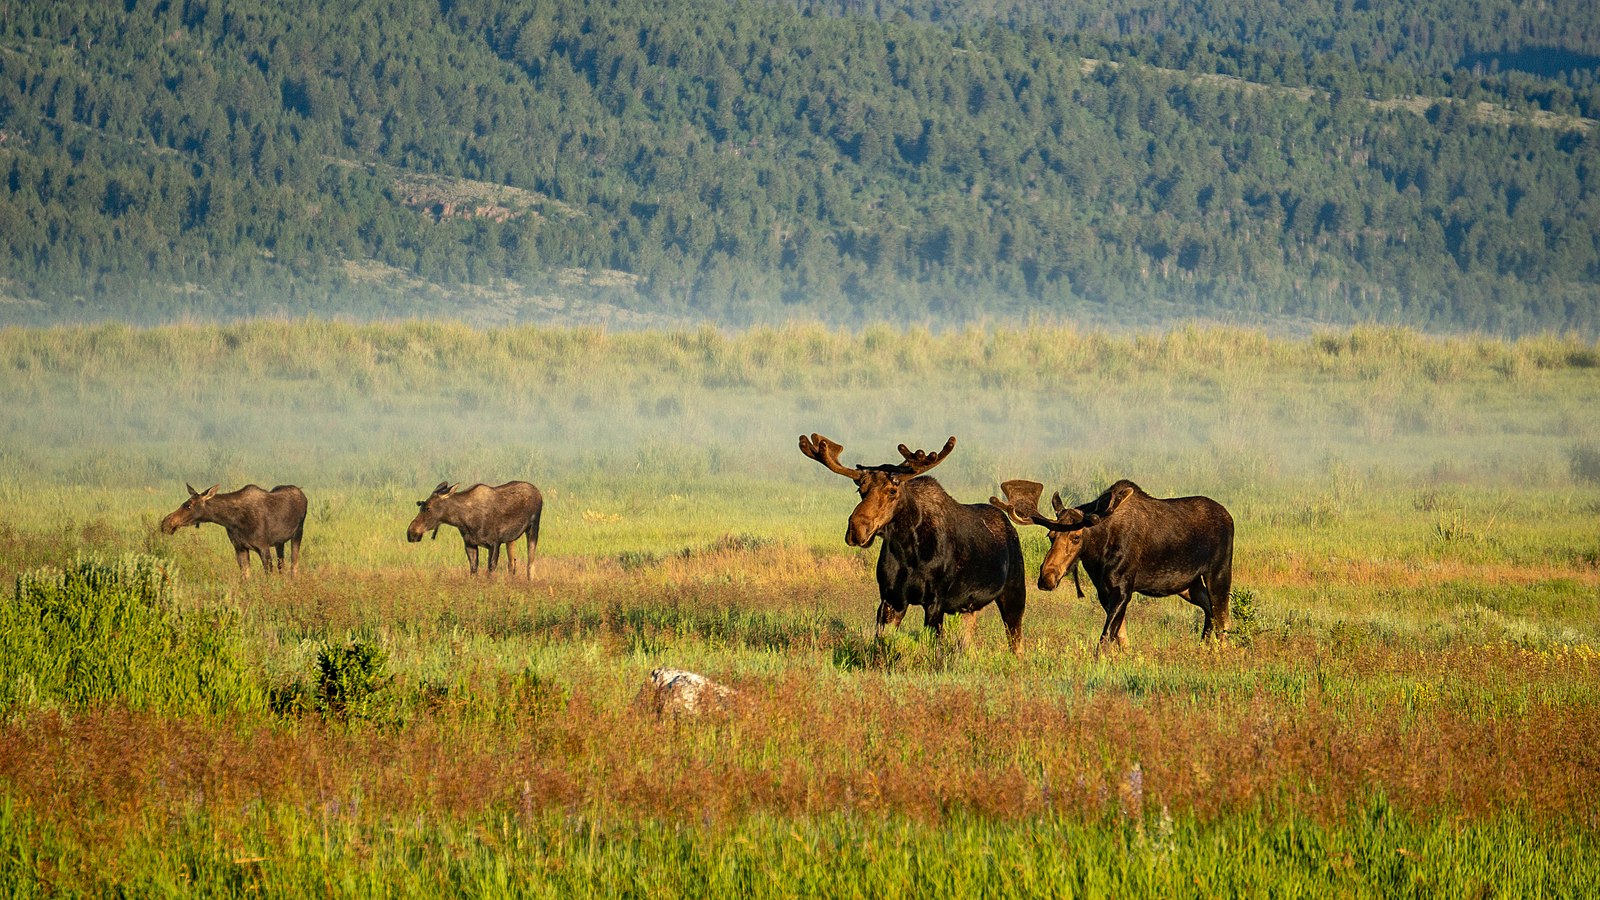 A feild of grass with mountains in the background. In the foreground two adult moose and two adolescent moose graze